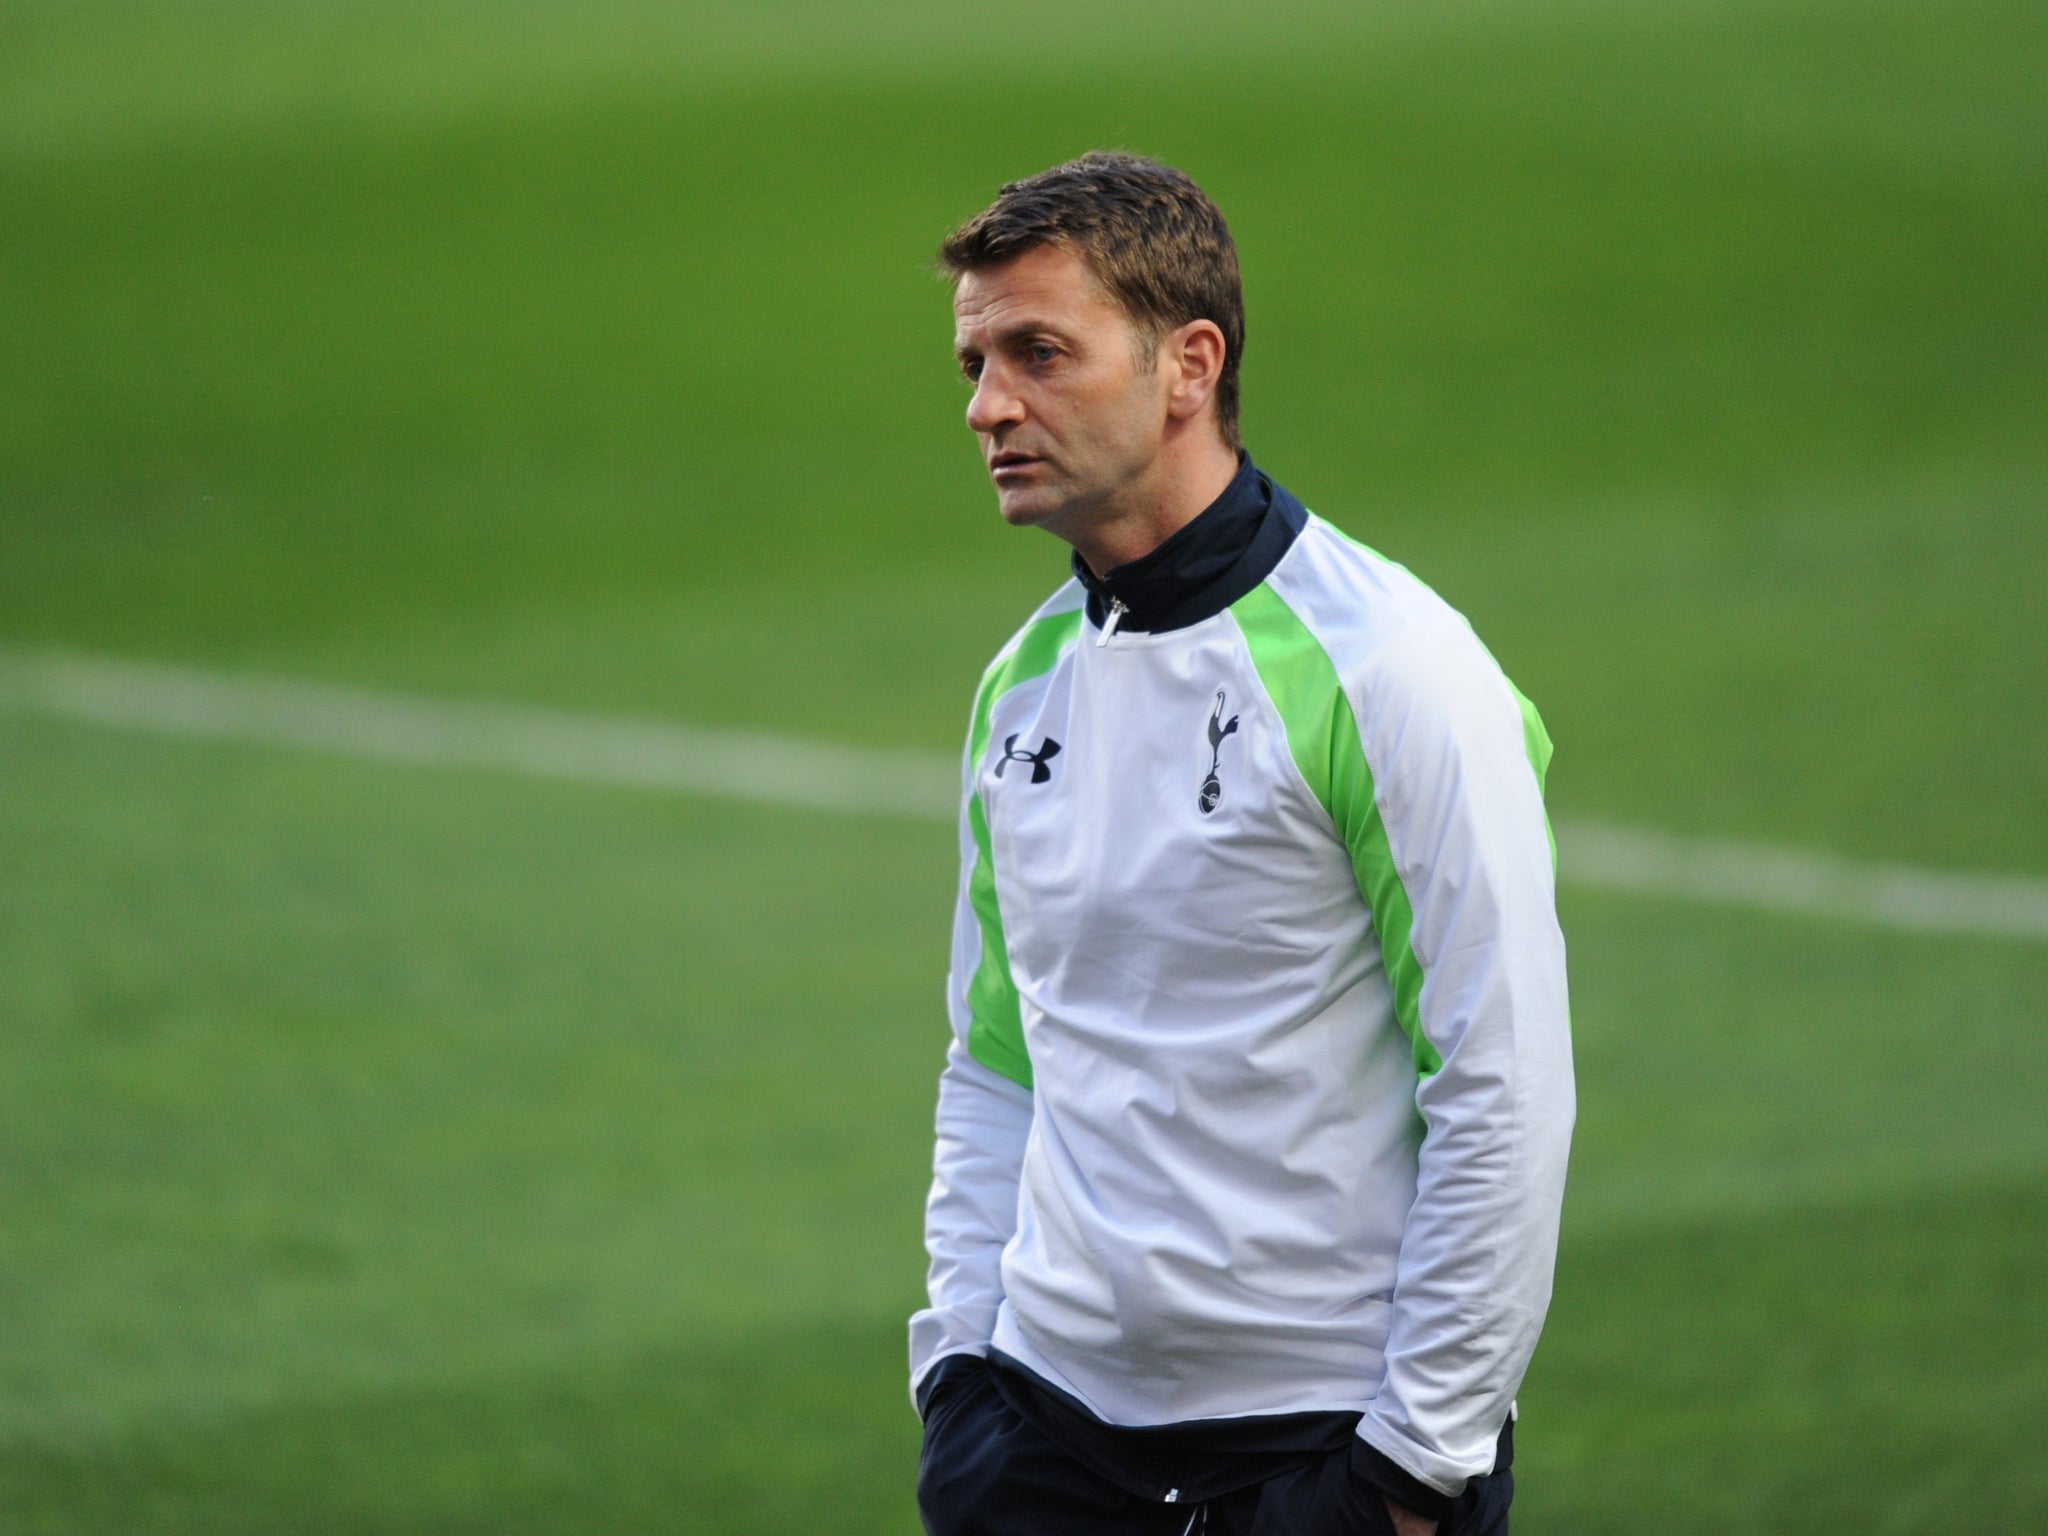 ‘I’ve had so many well-wishers, especially English managers, who all
want me to do well,’ says Tim Sherwood